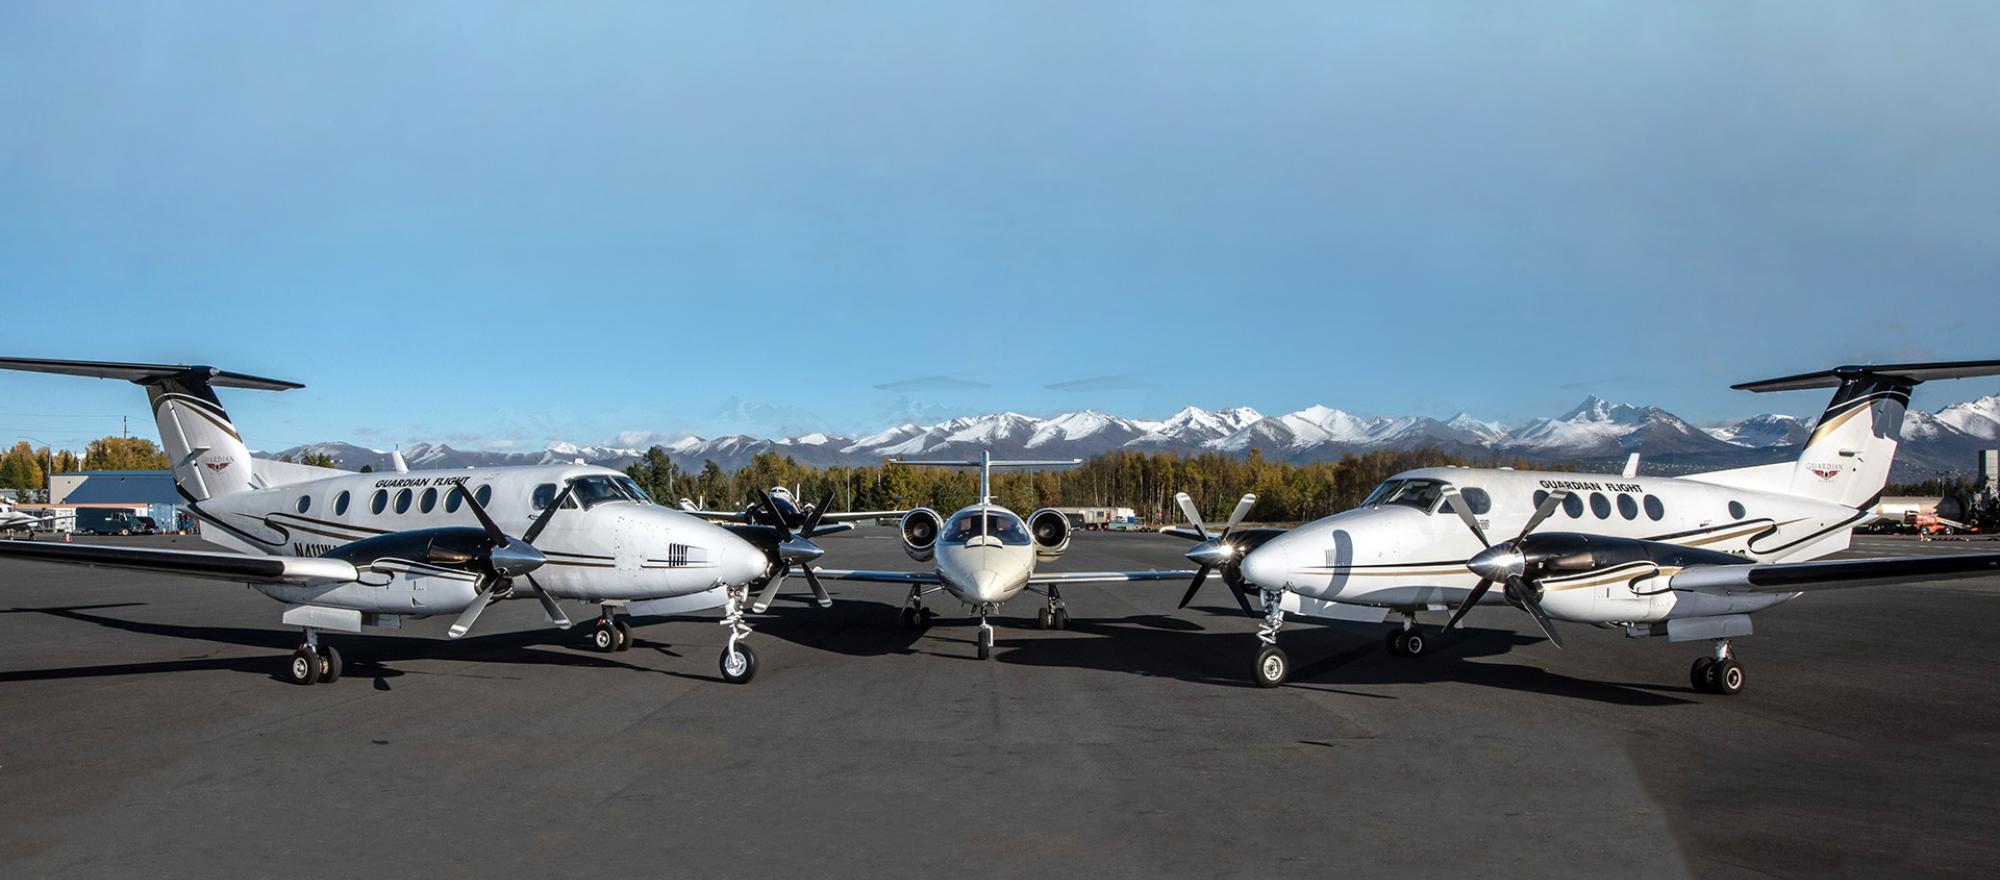 Guardian Flight King Airs and Learjet on Airport ramp